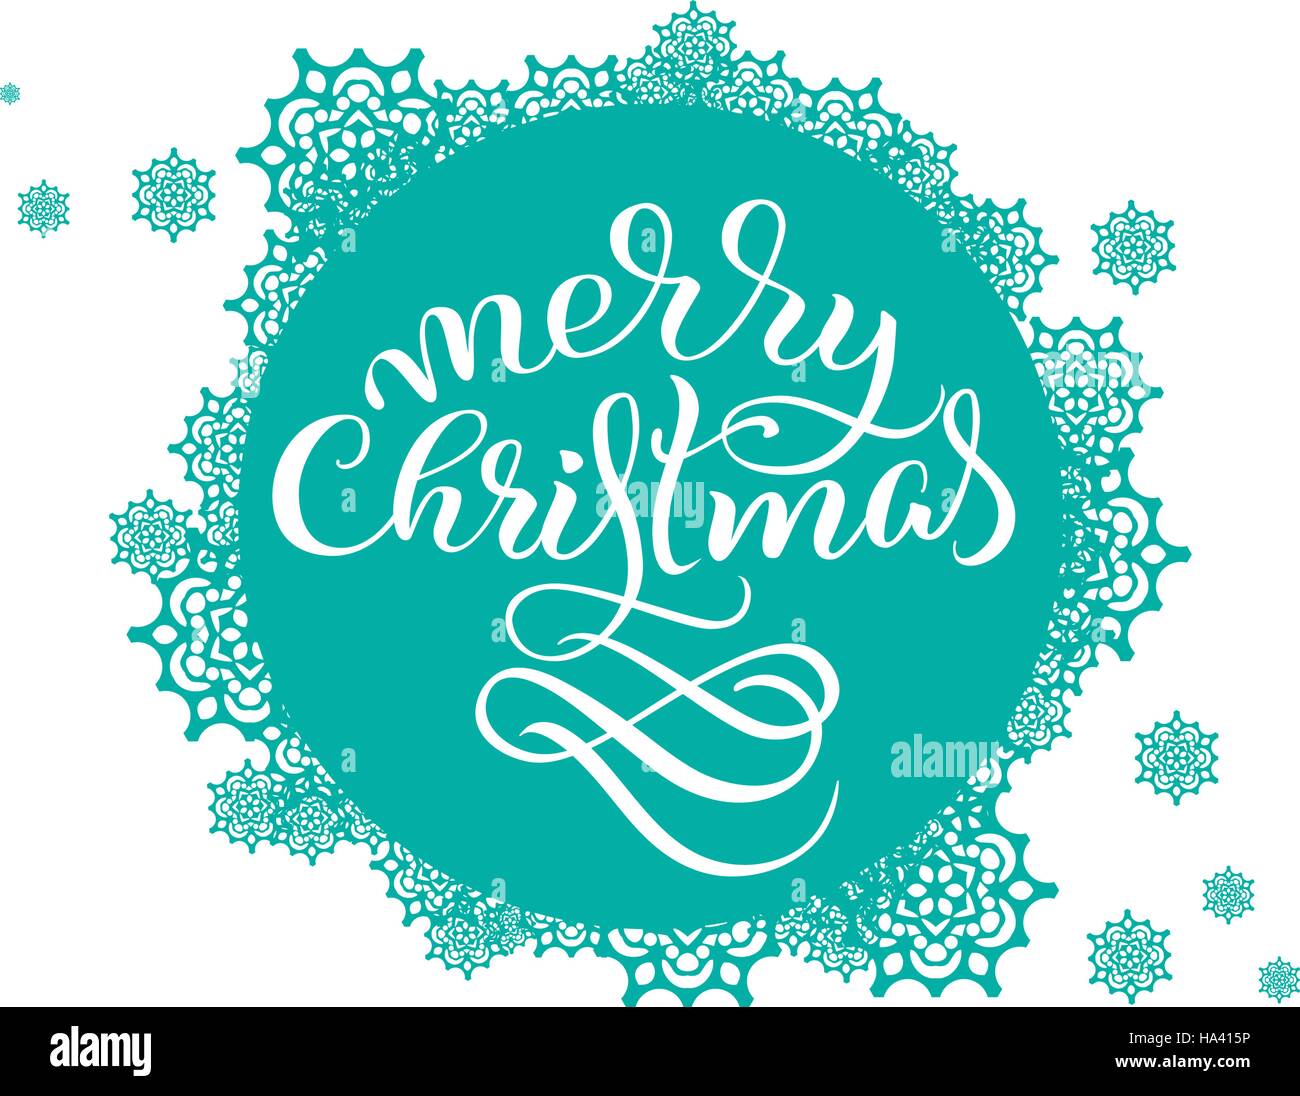 Turquoise round background with snowflakes on white and the text Merry Christmas. Vector illustration EPS10. Calligraphy lettering Stock Vector